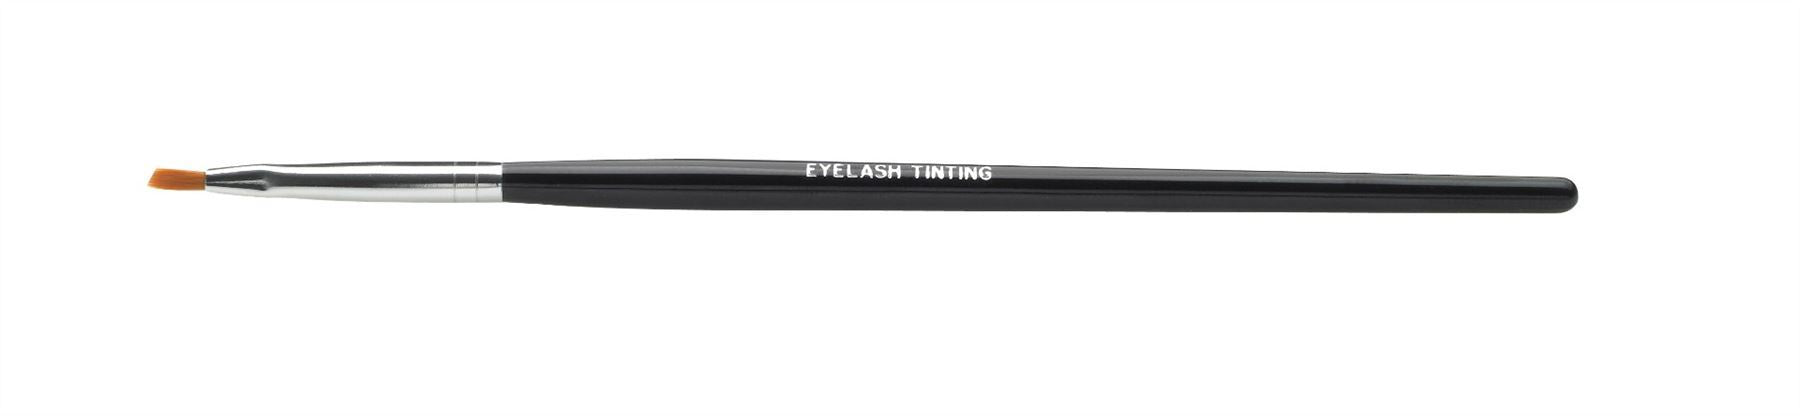 Hive Of Beauty 8" Tinting Brush - Specially Designed for Lash and Brow